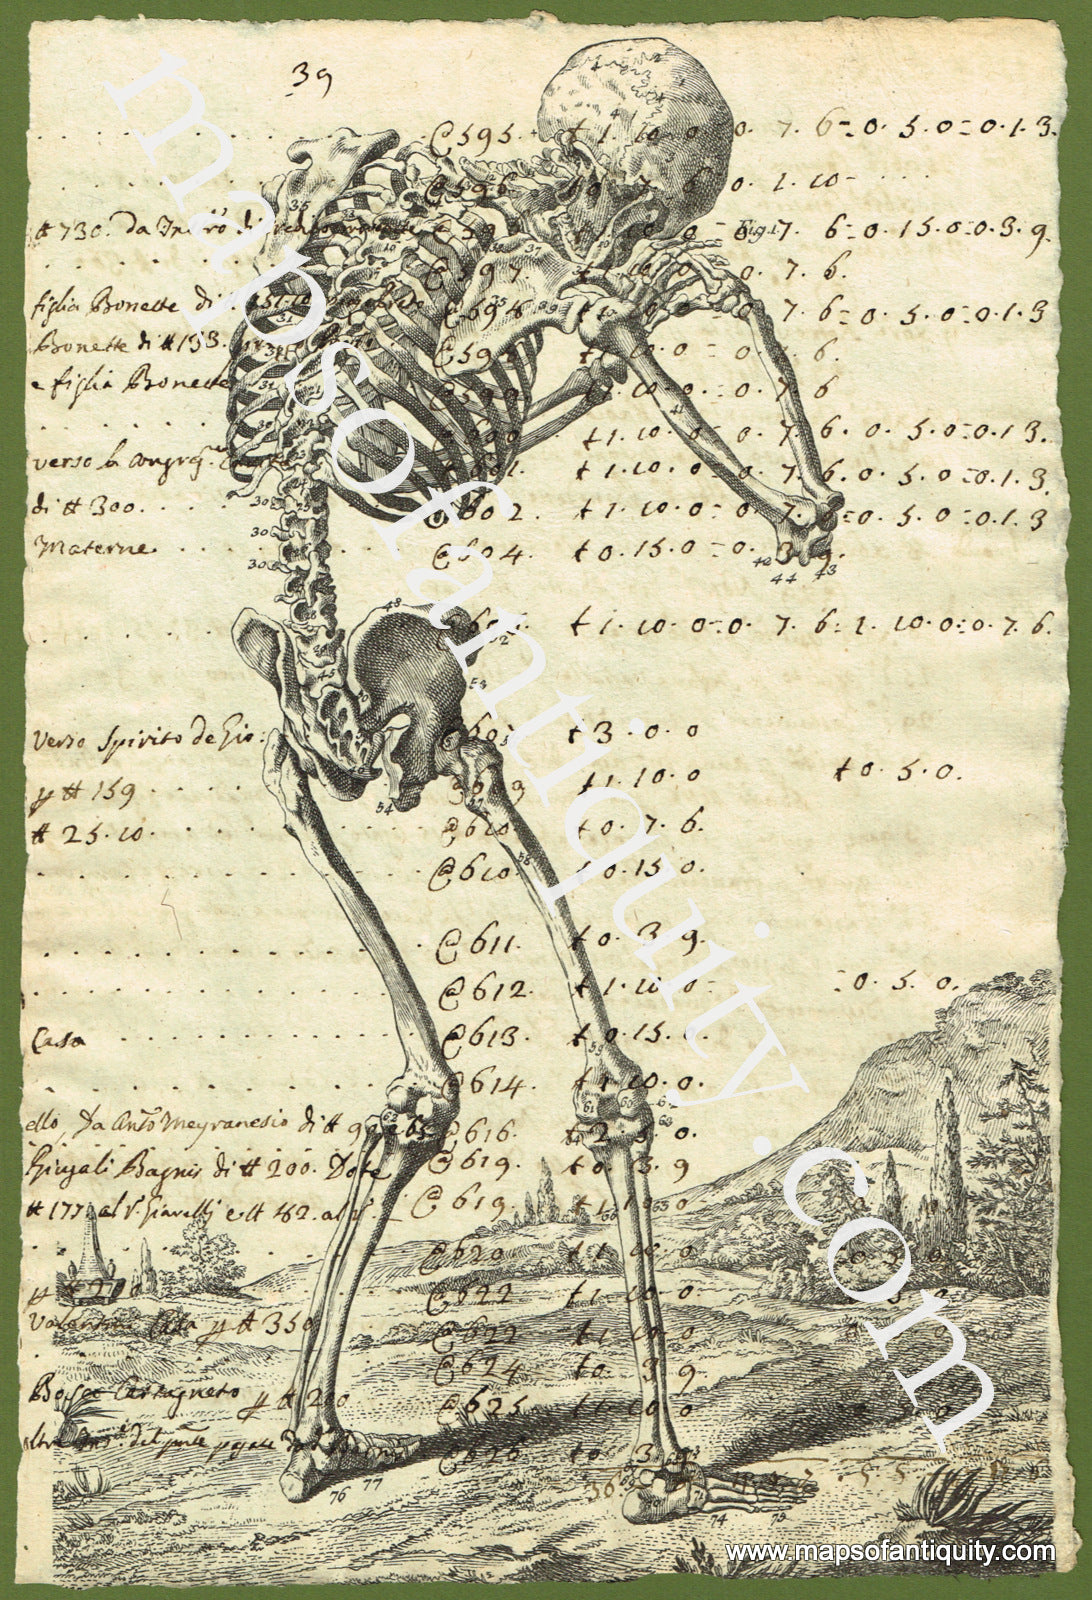 Maps-of-Antiquity-Antique-Ledger-Paper-Print-Digitally-Engraved-Specialty-Reproduction-Illustration-Anatomical-Anatomy-Human-Skeletal-System-Skeleton